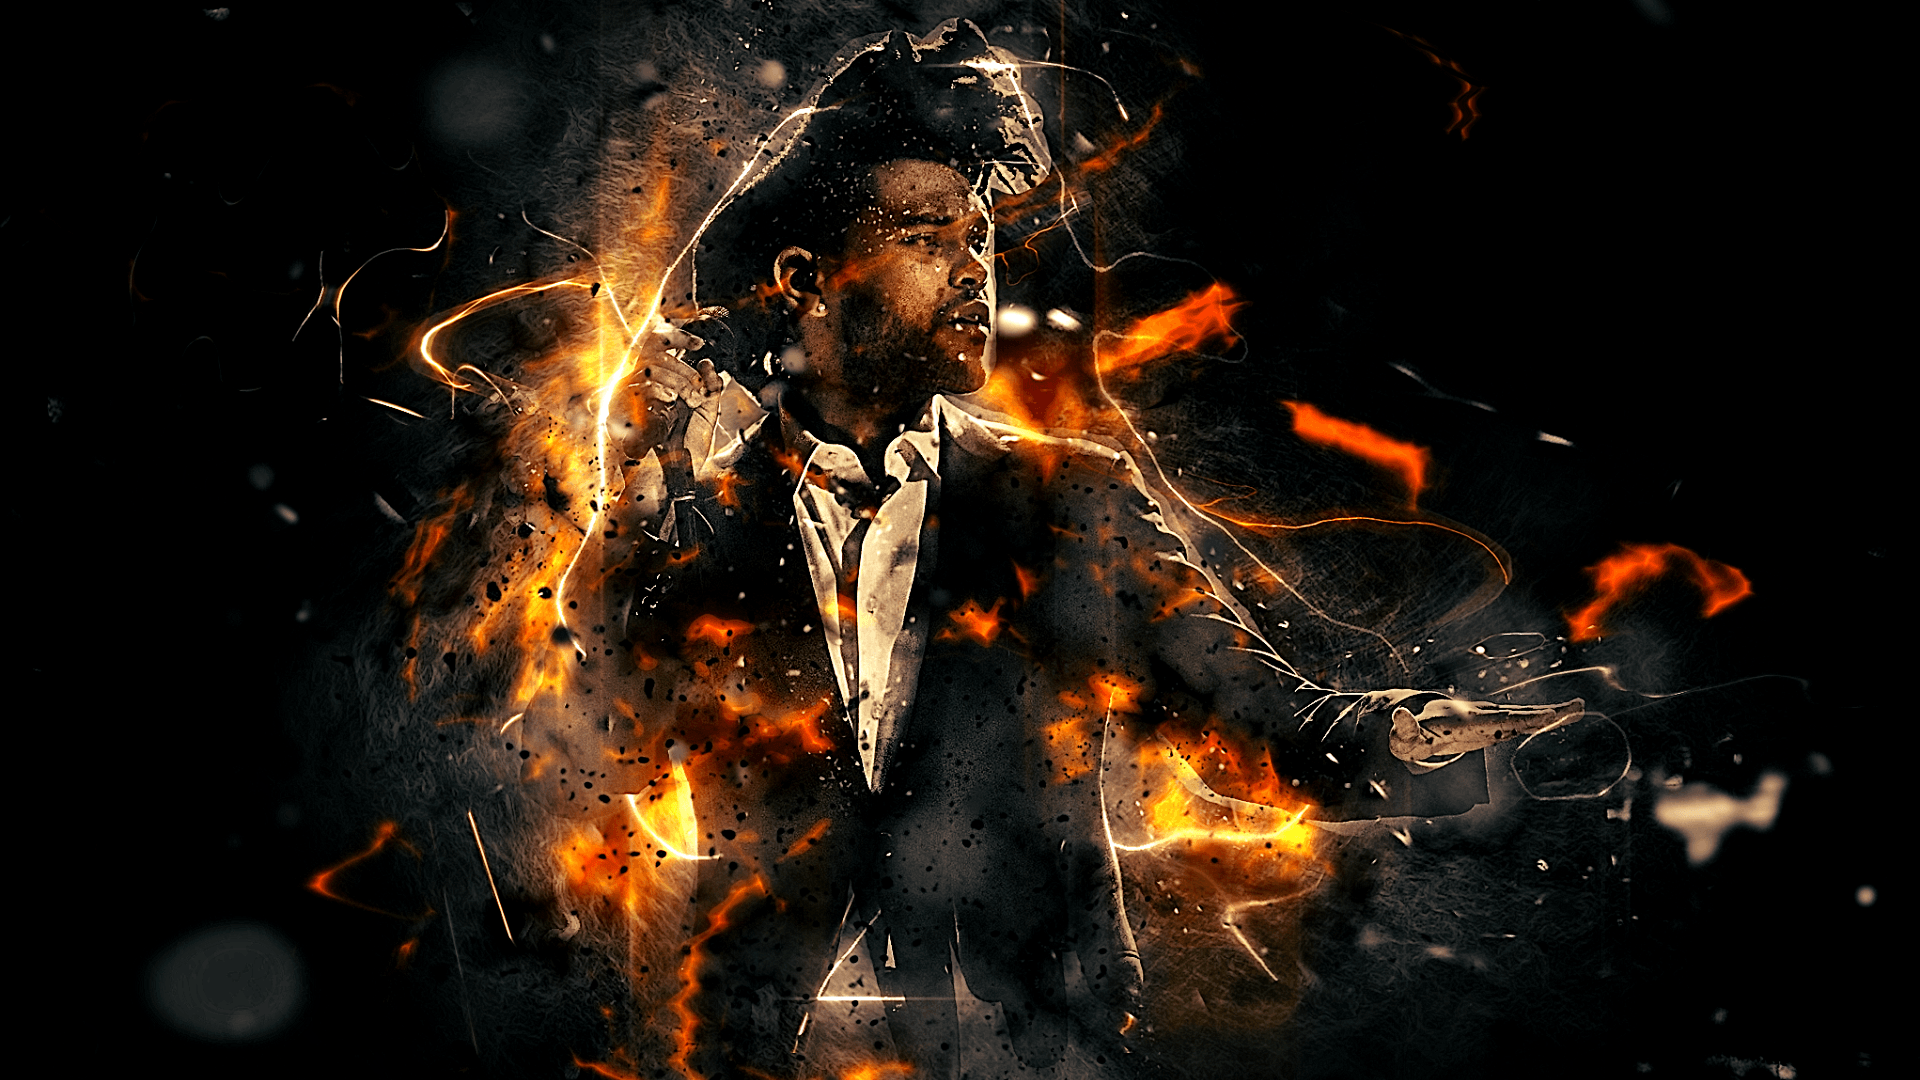 The Weeknd Wallpaper High Quality